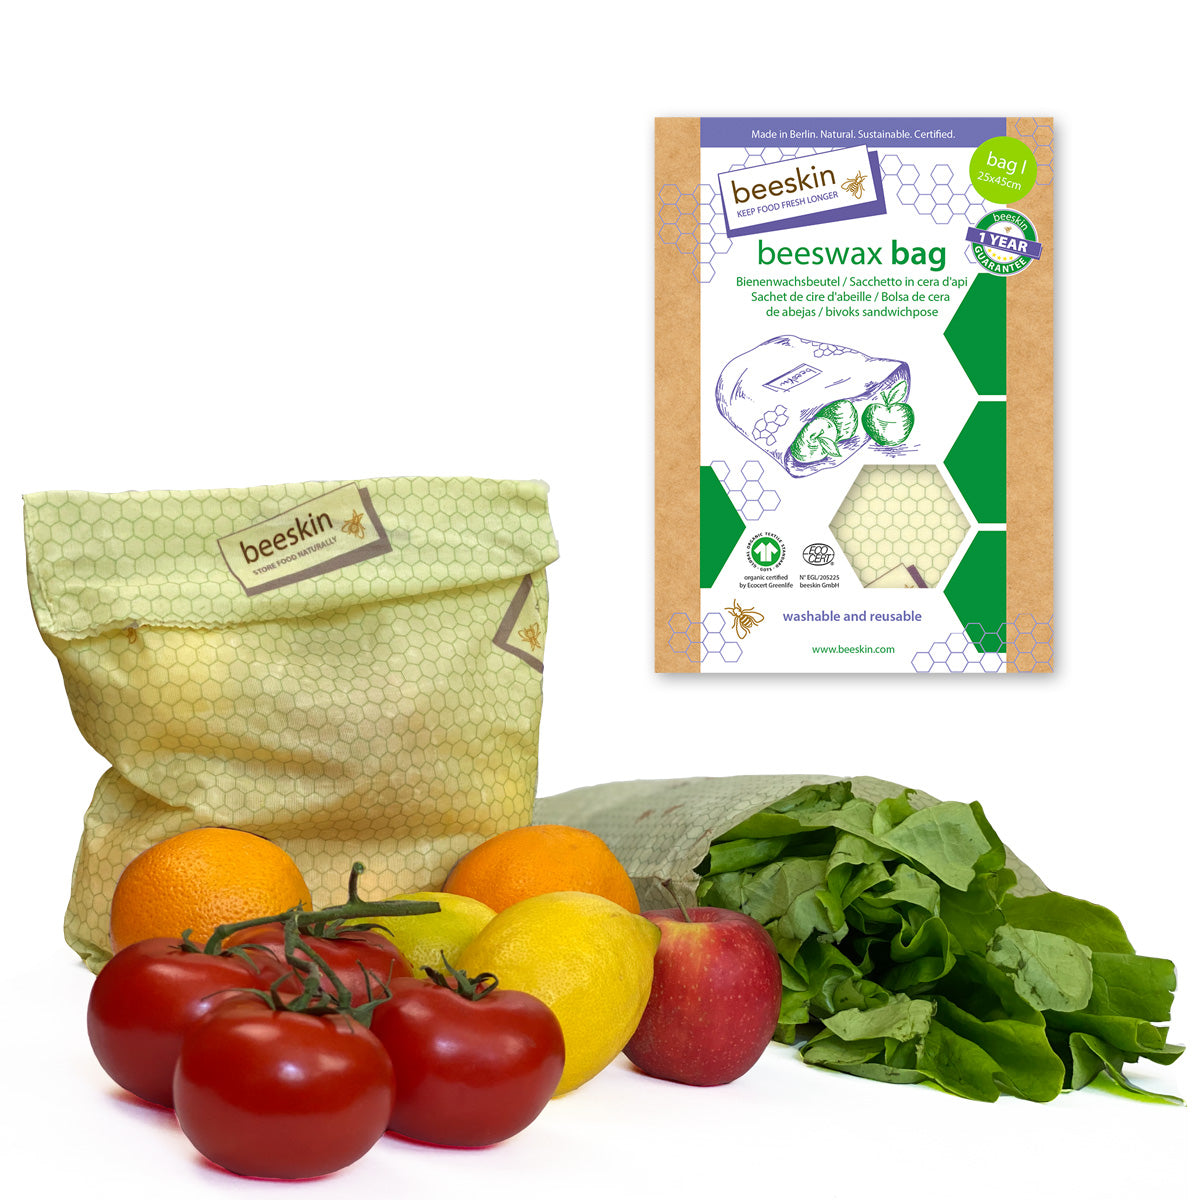 beeskin beeswax bag l closed with tomatoes, lemon, apple and salat, also the package